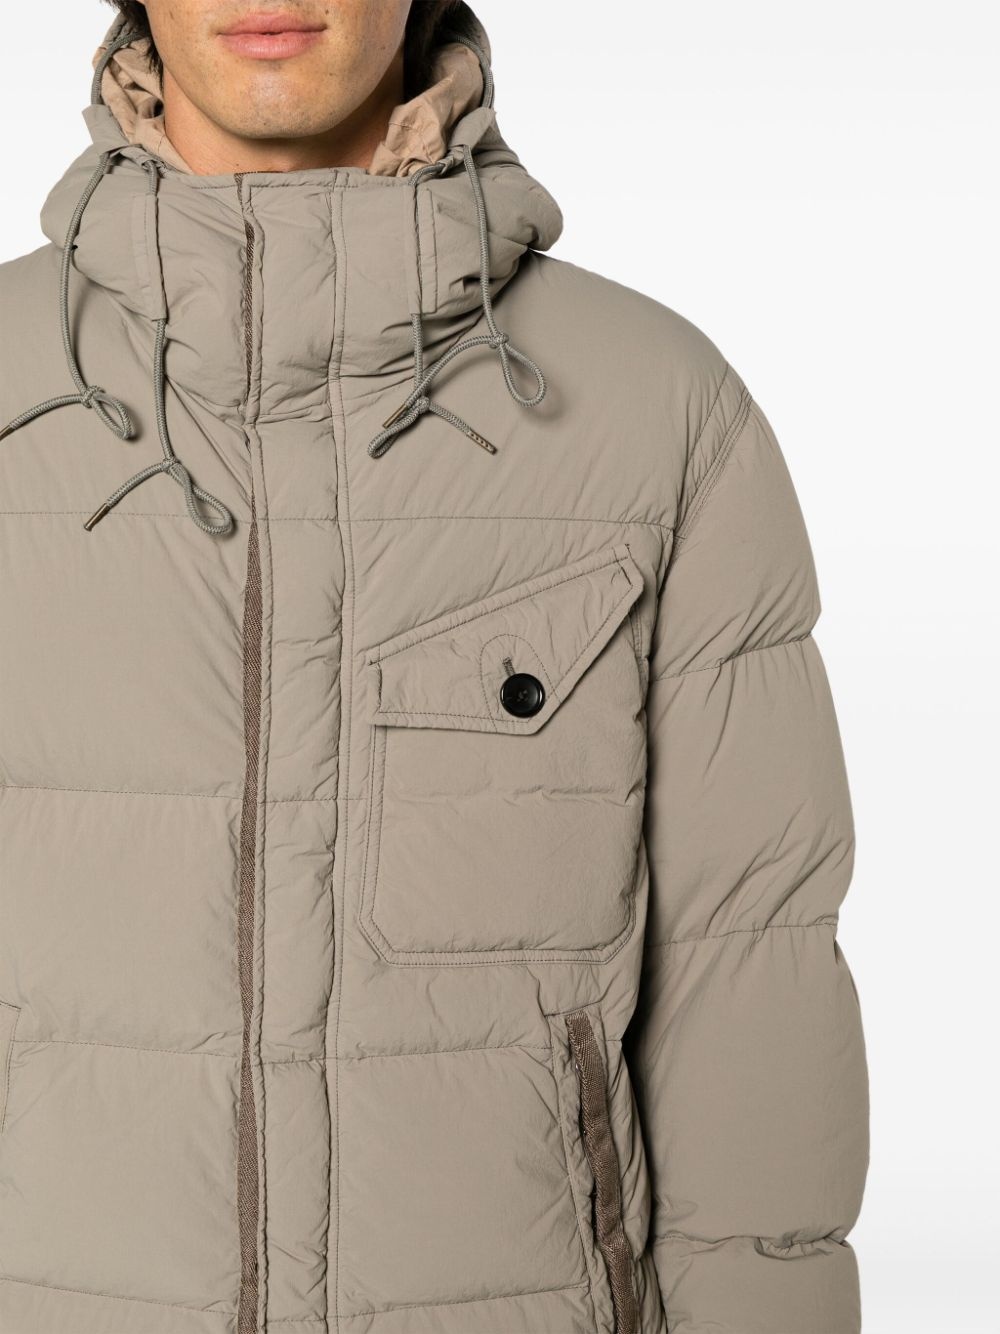 Survival quilted jacket - 5